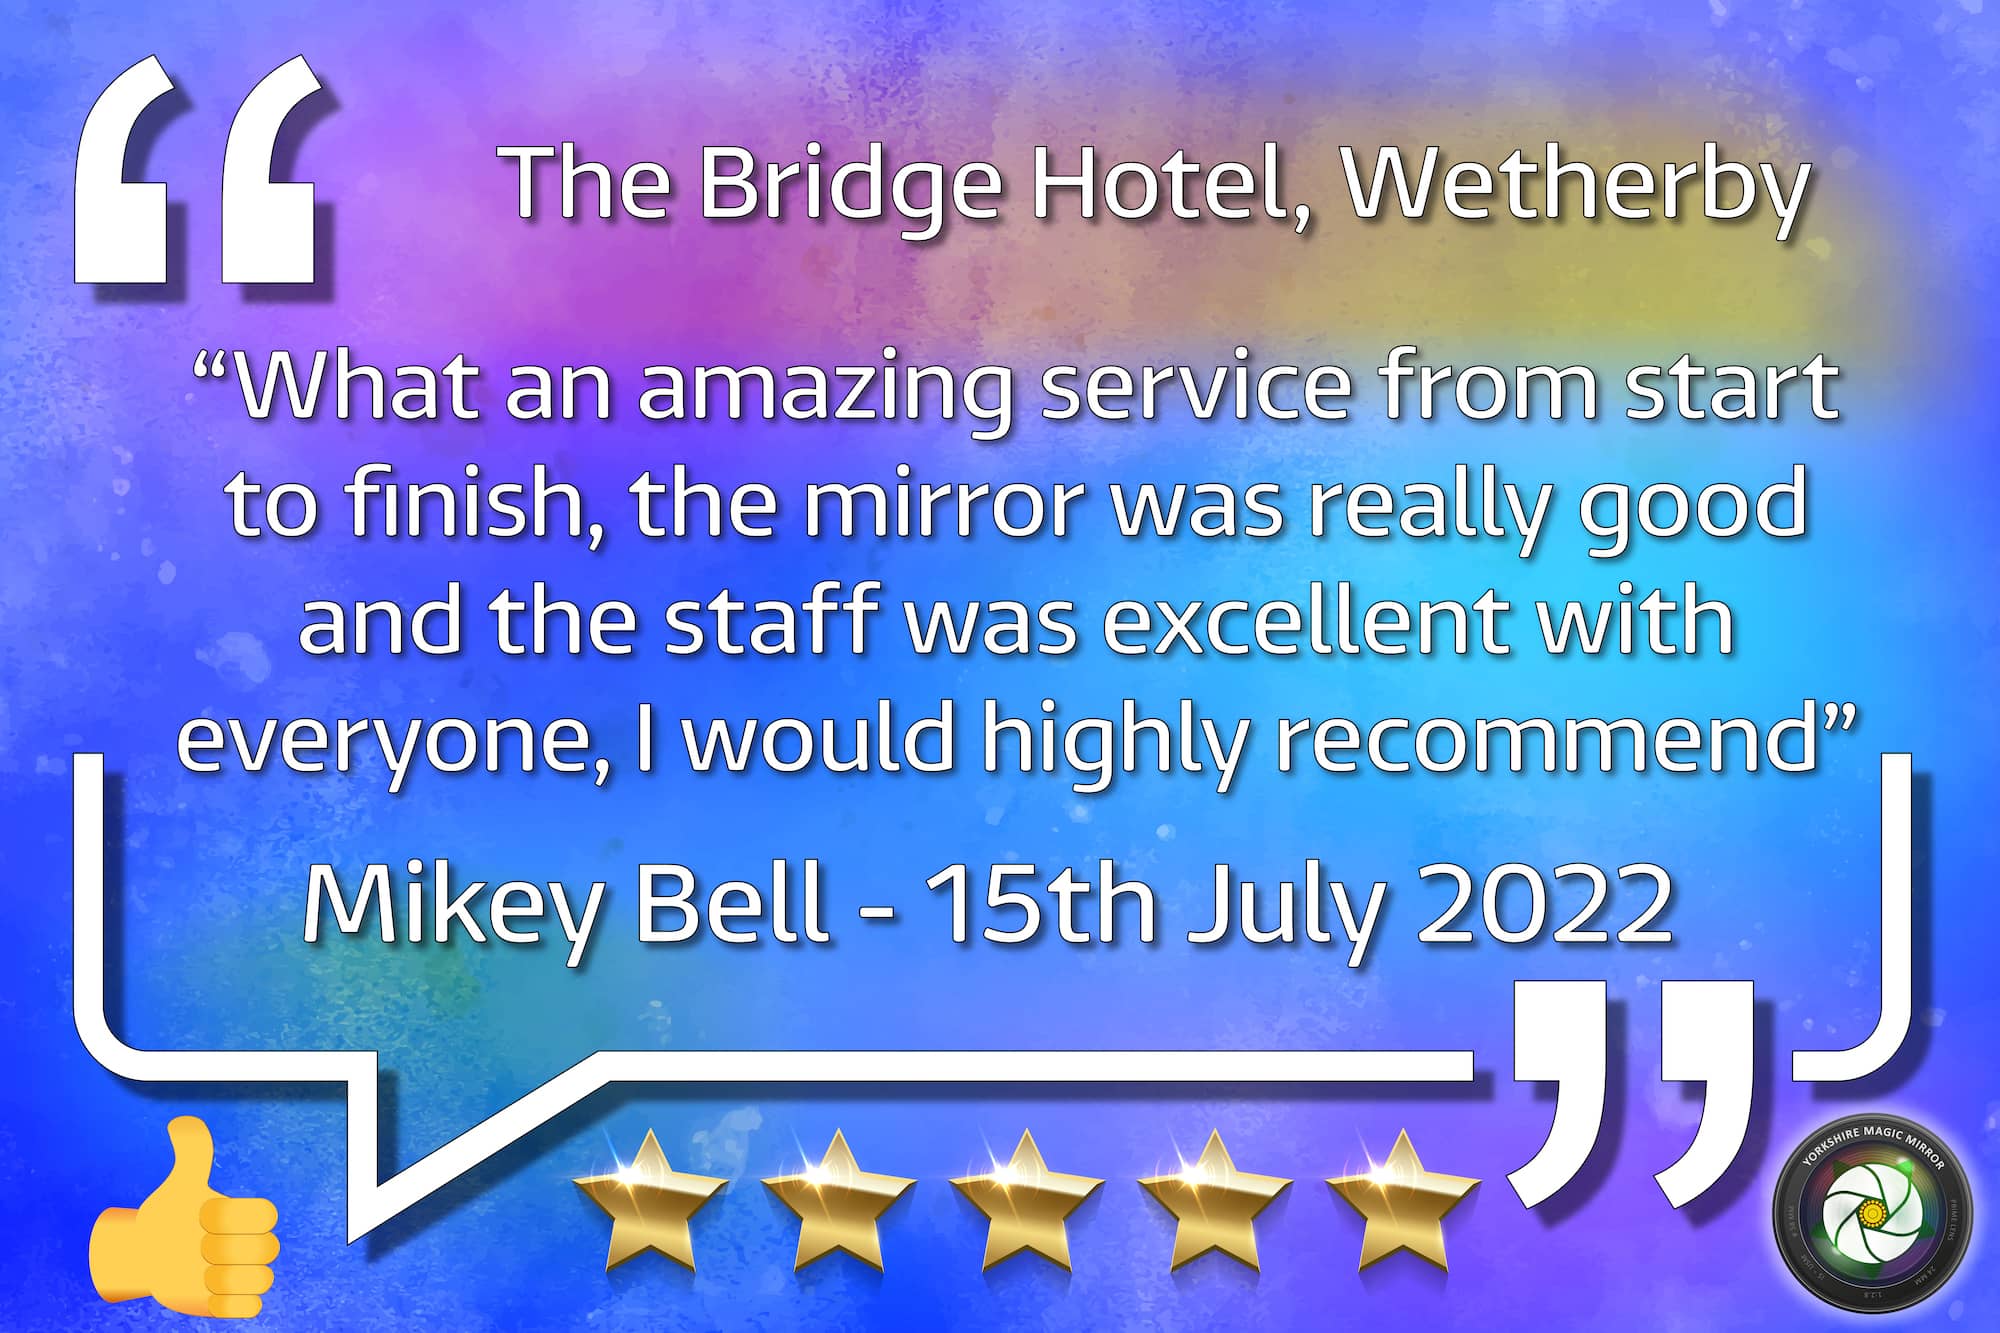 The Bridge Wetherby Mikey Bell Wedding 2022